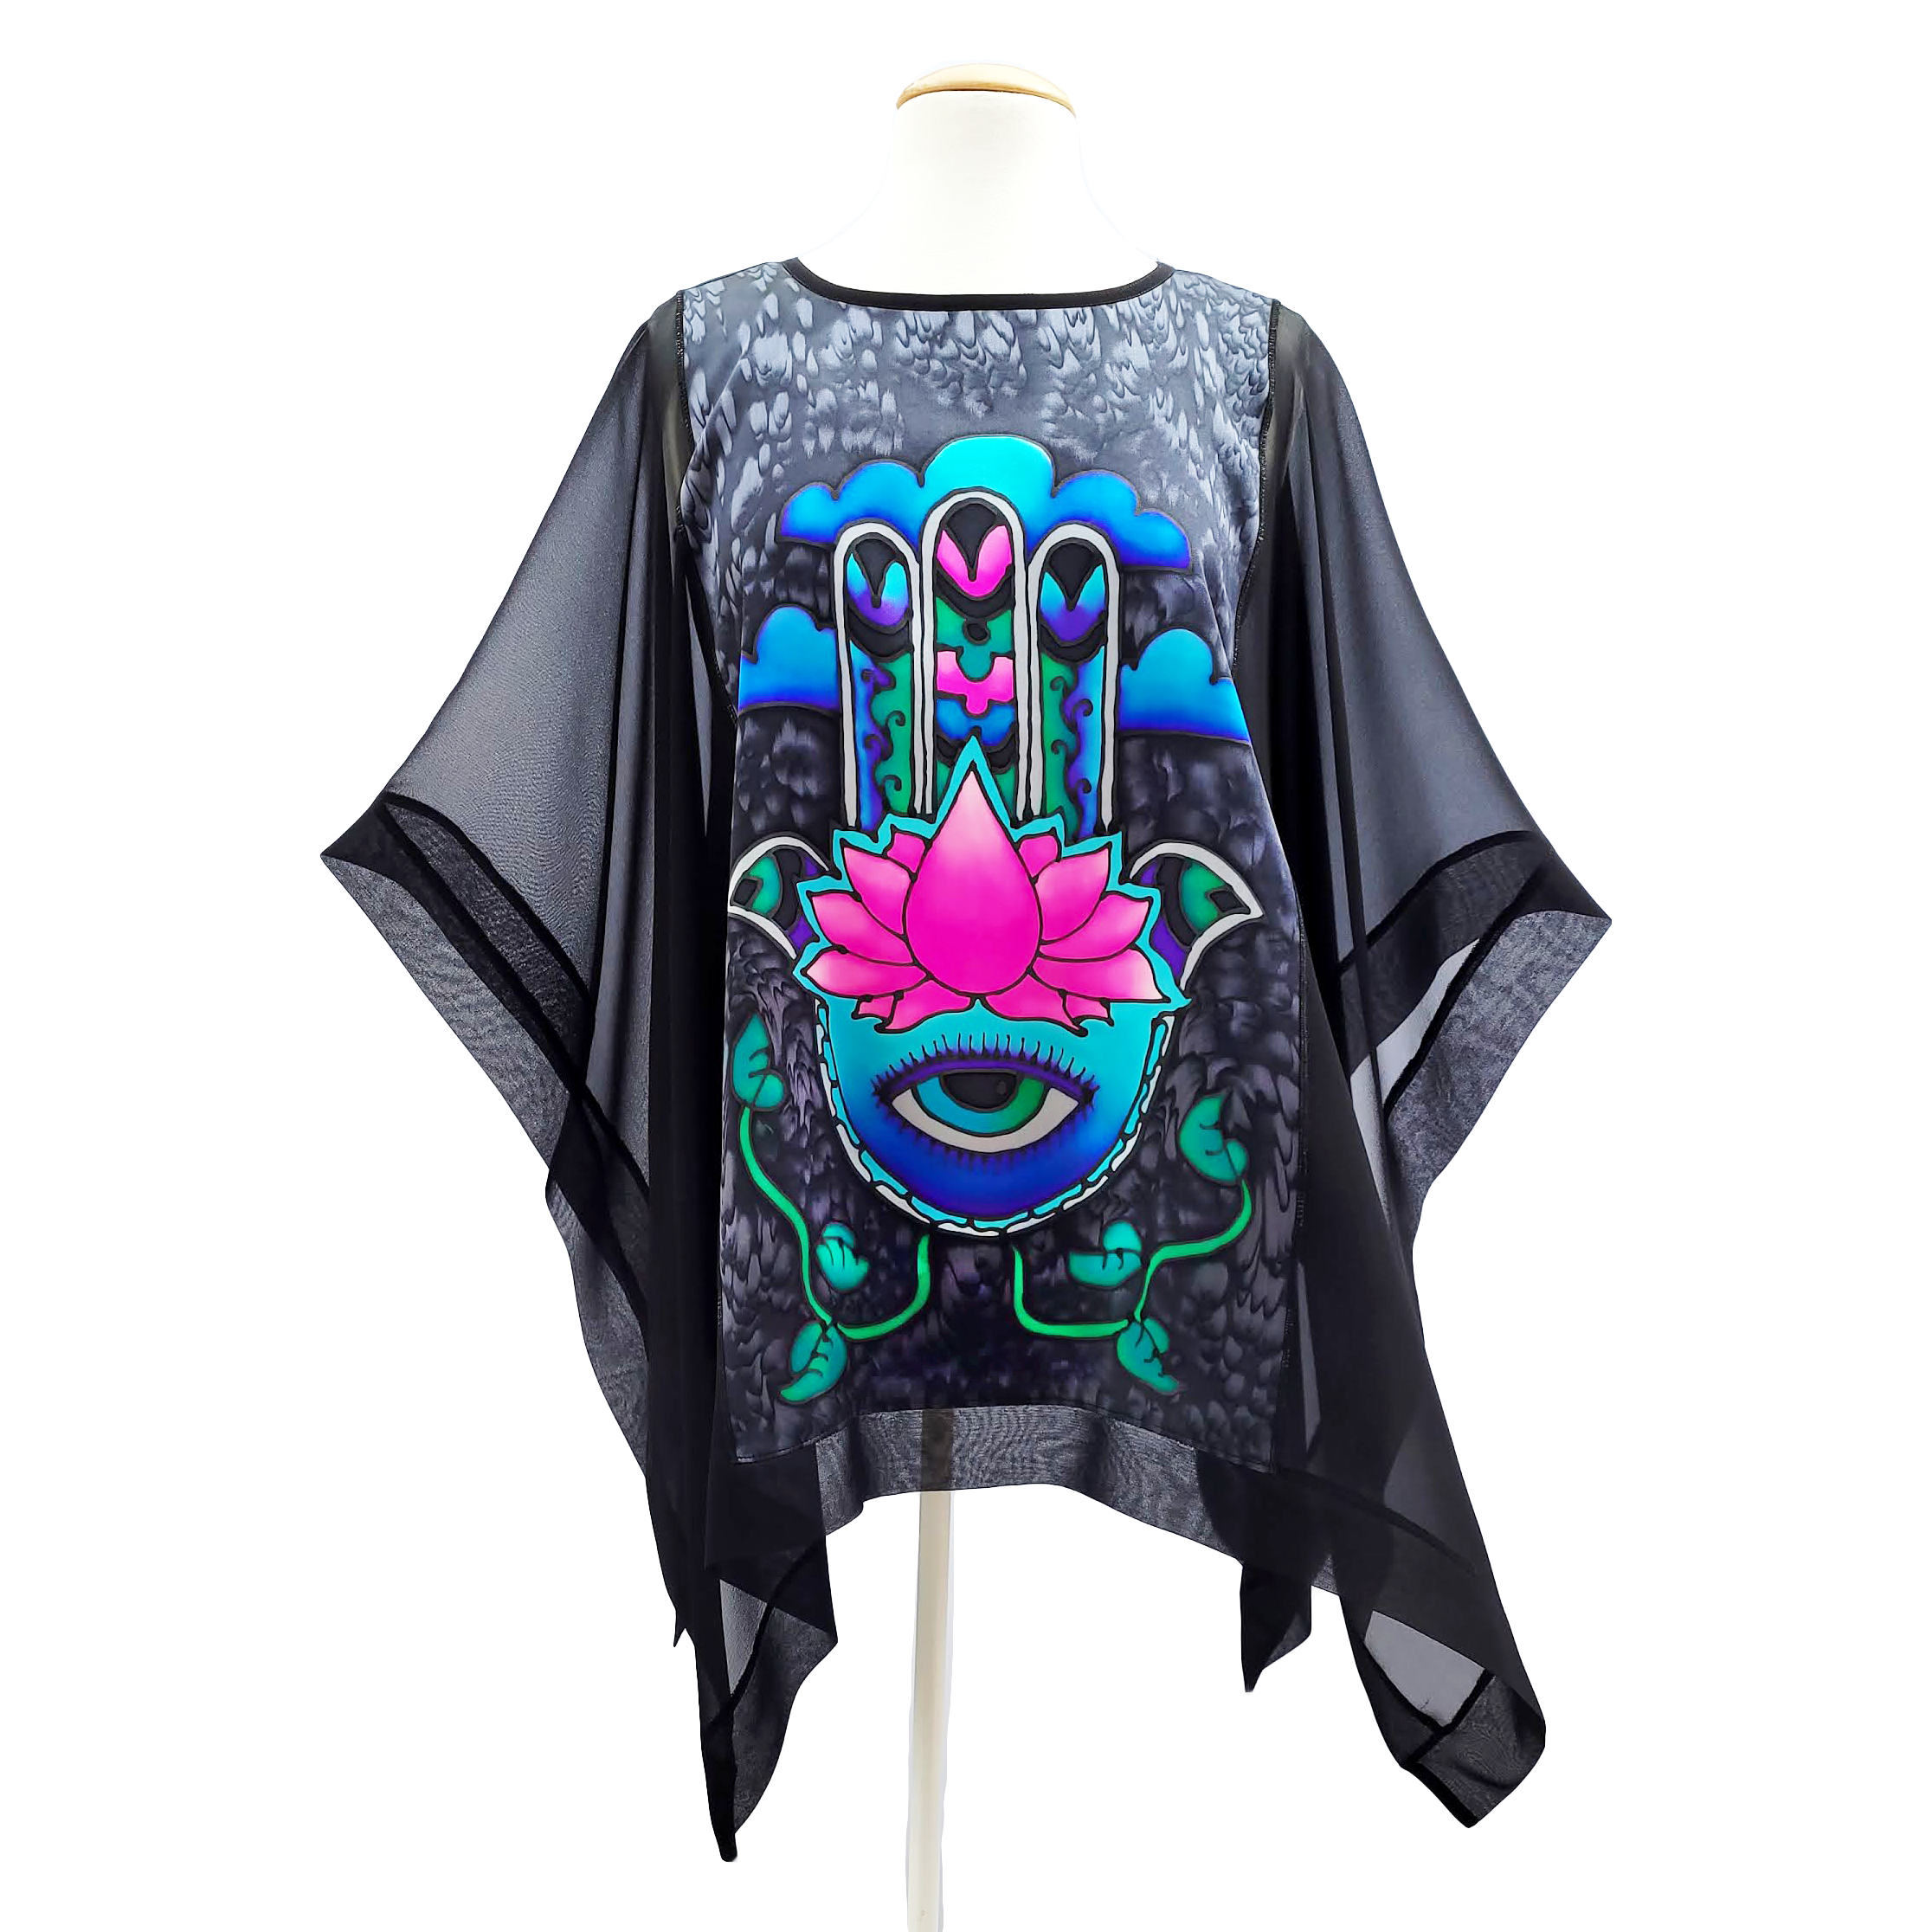 silk clothing hand painted poncho top ladies over blouse handmade by Lynne Kiel